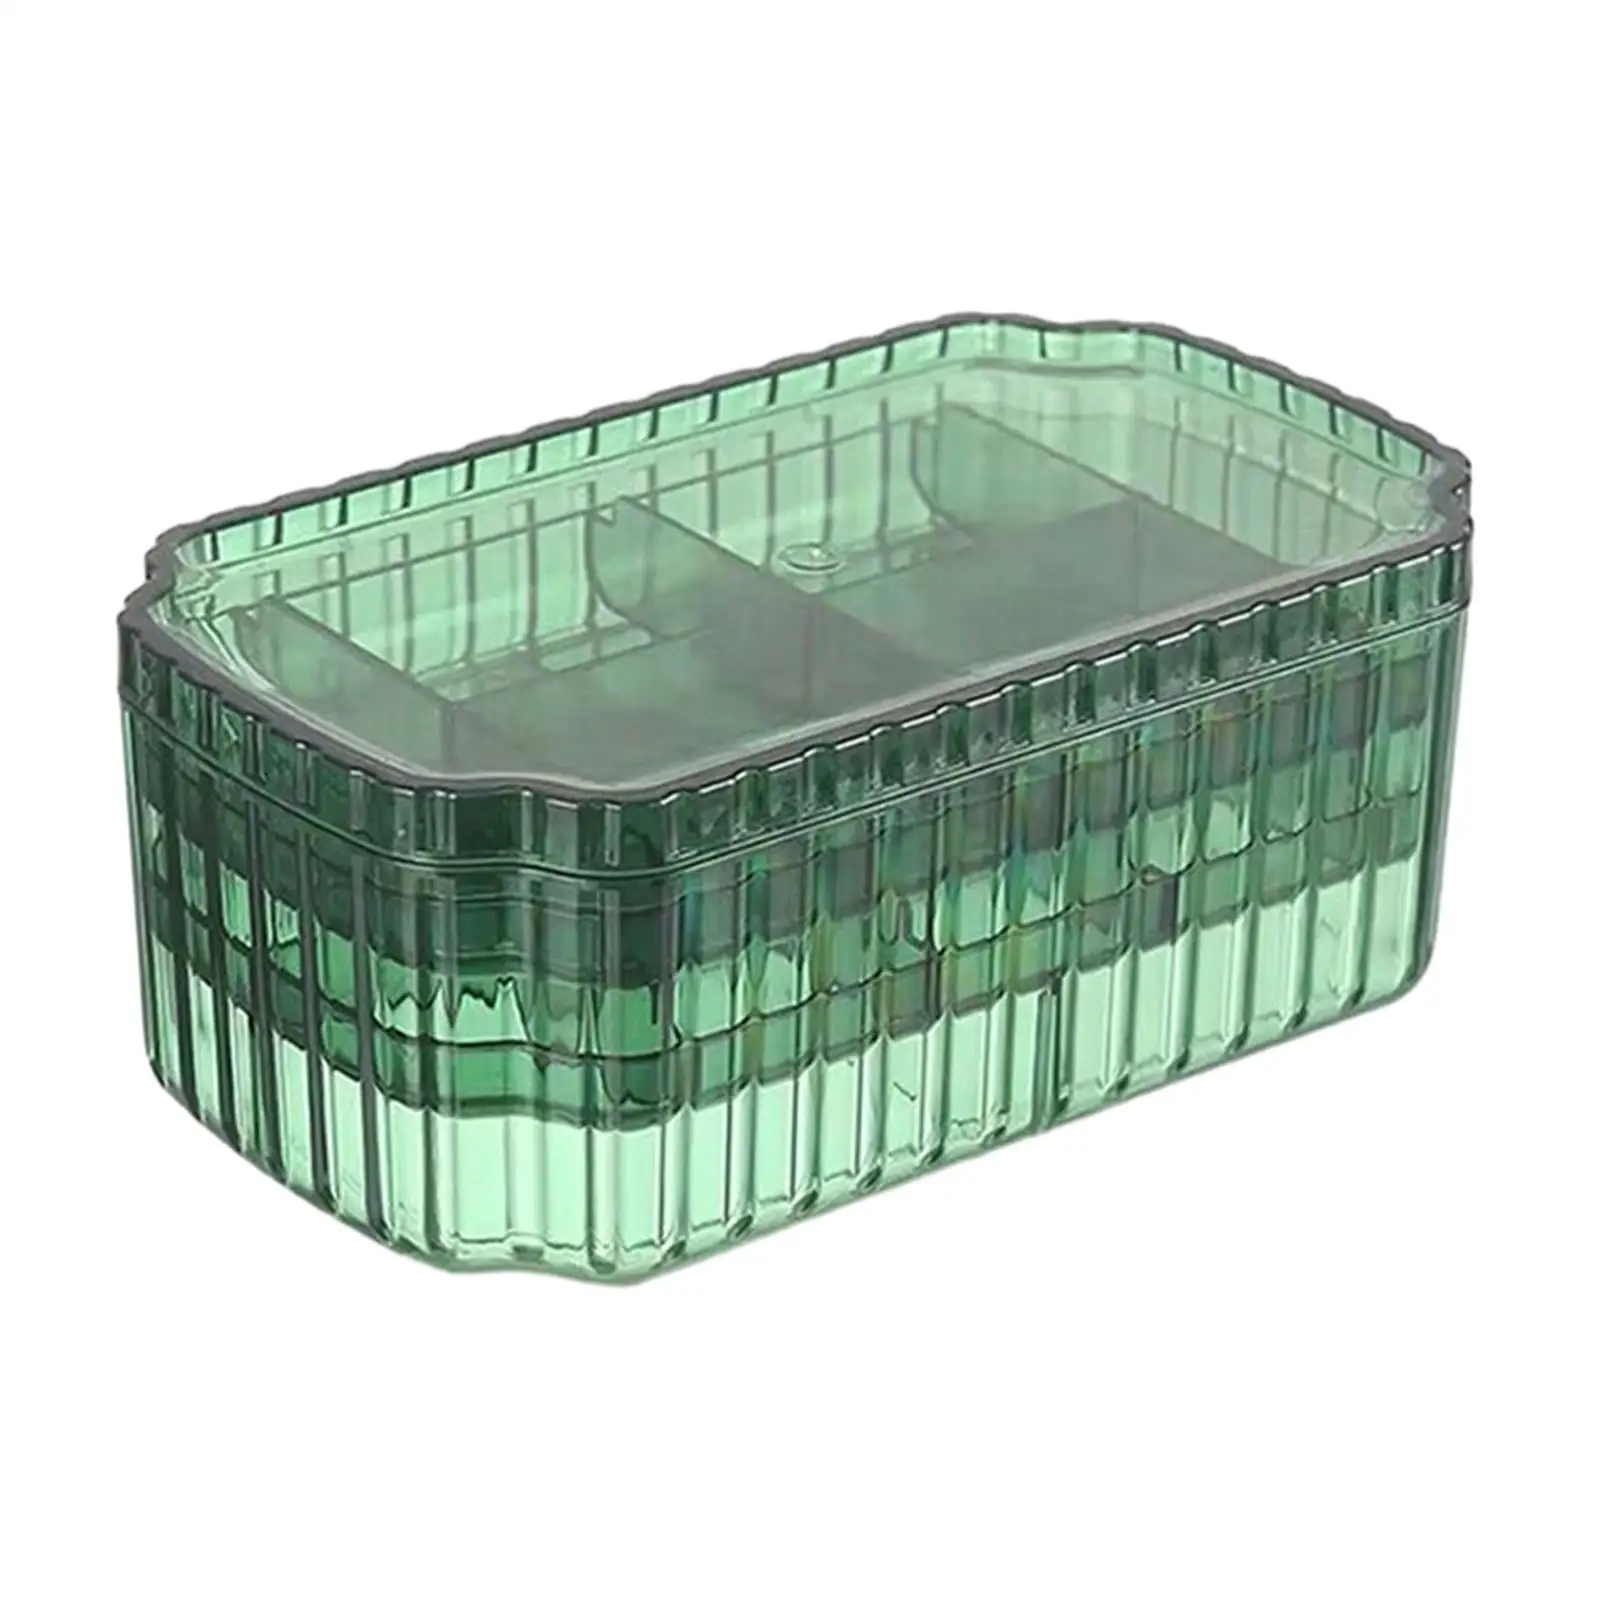 Jewelry Storage Box Earring Tray 3 Layer Jewelry Organizer with Multi Grids Multifunctional Large Capacity for Birthday Gifts